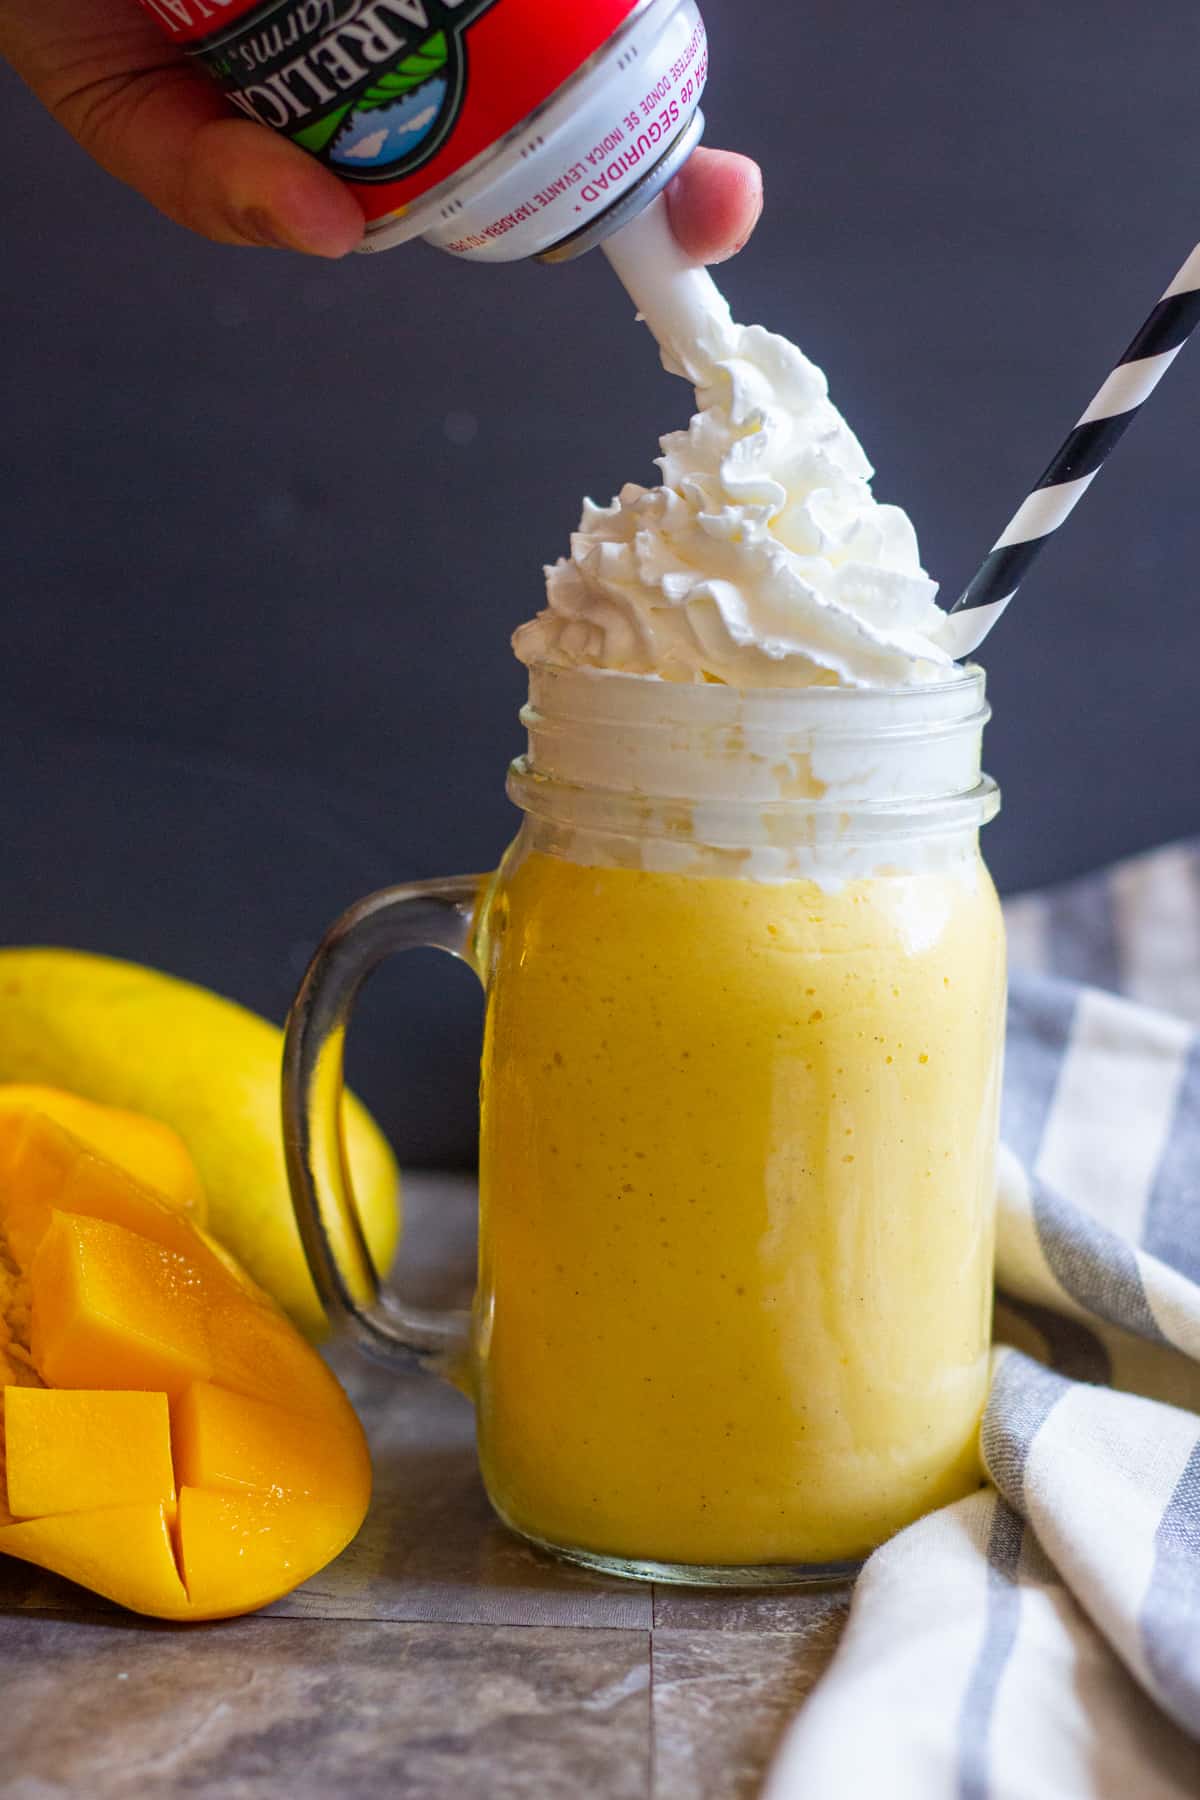 mango milkshake with ice cream is topped with whipped cream